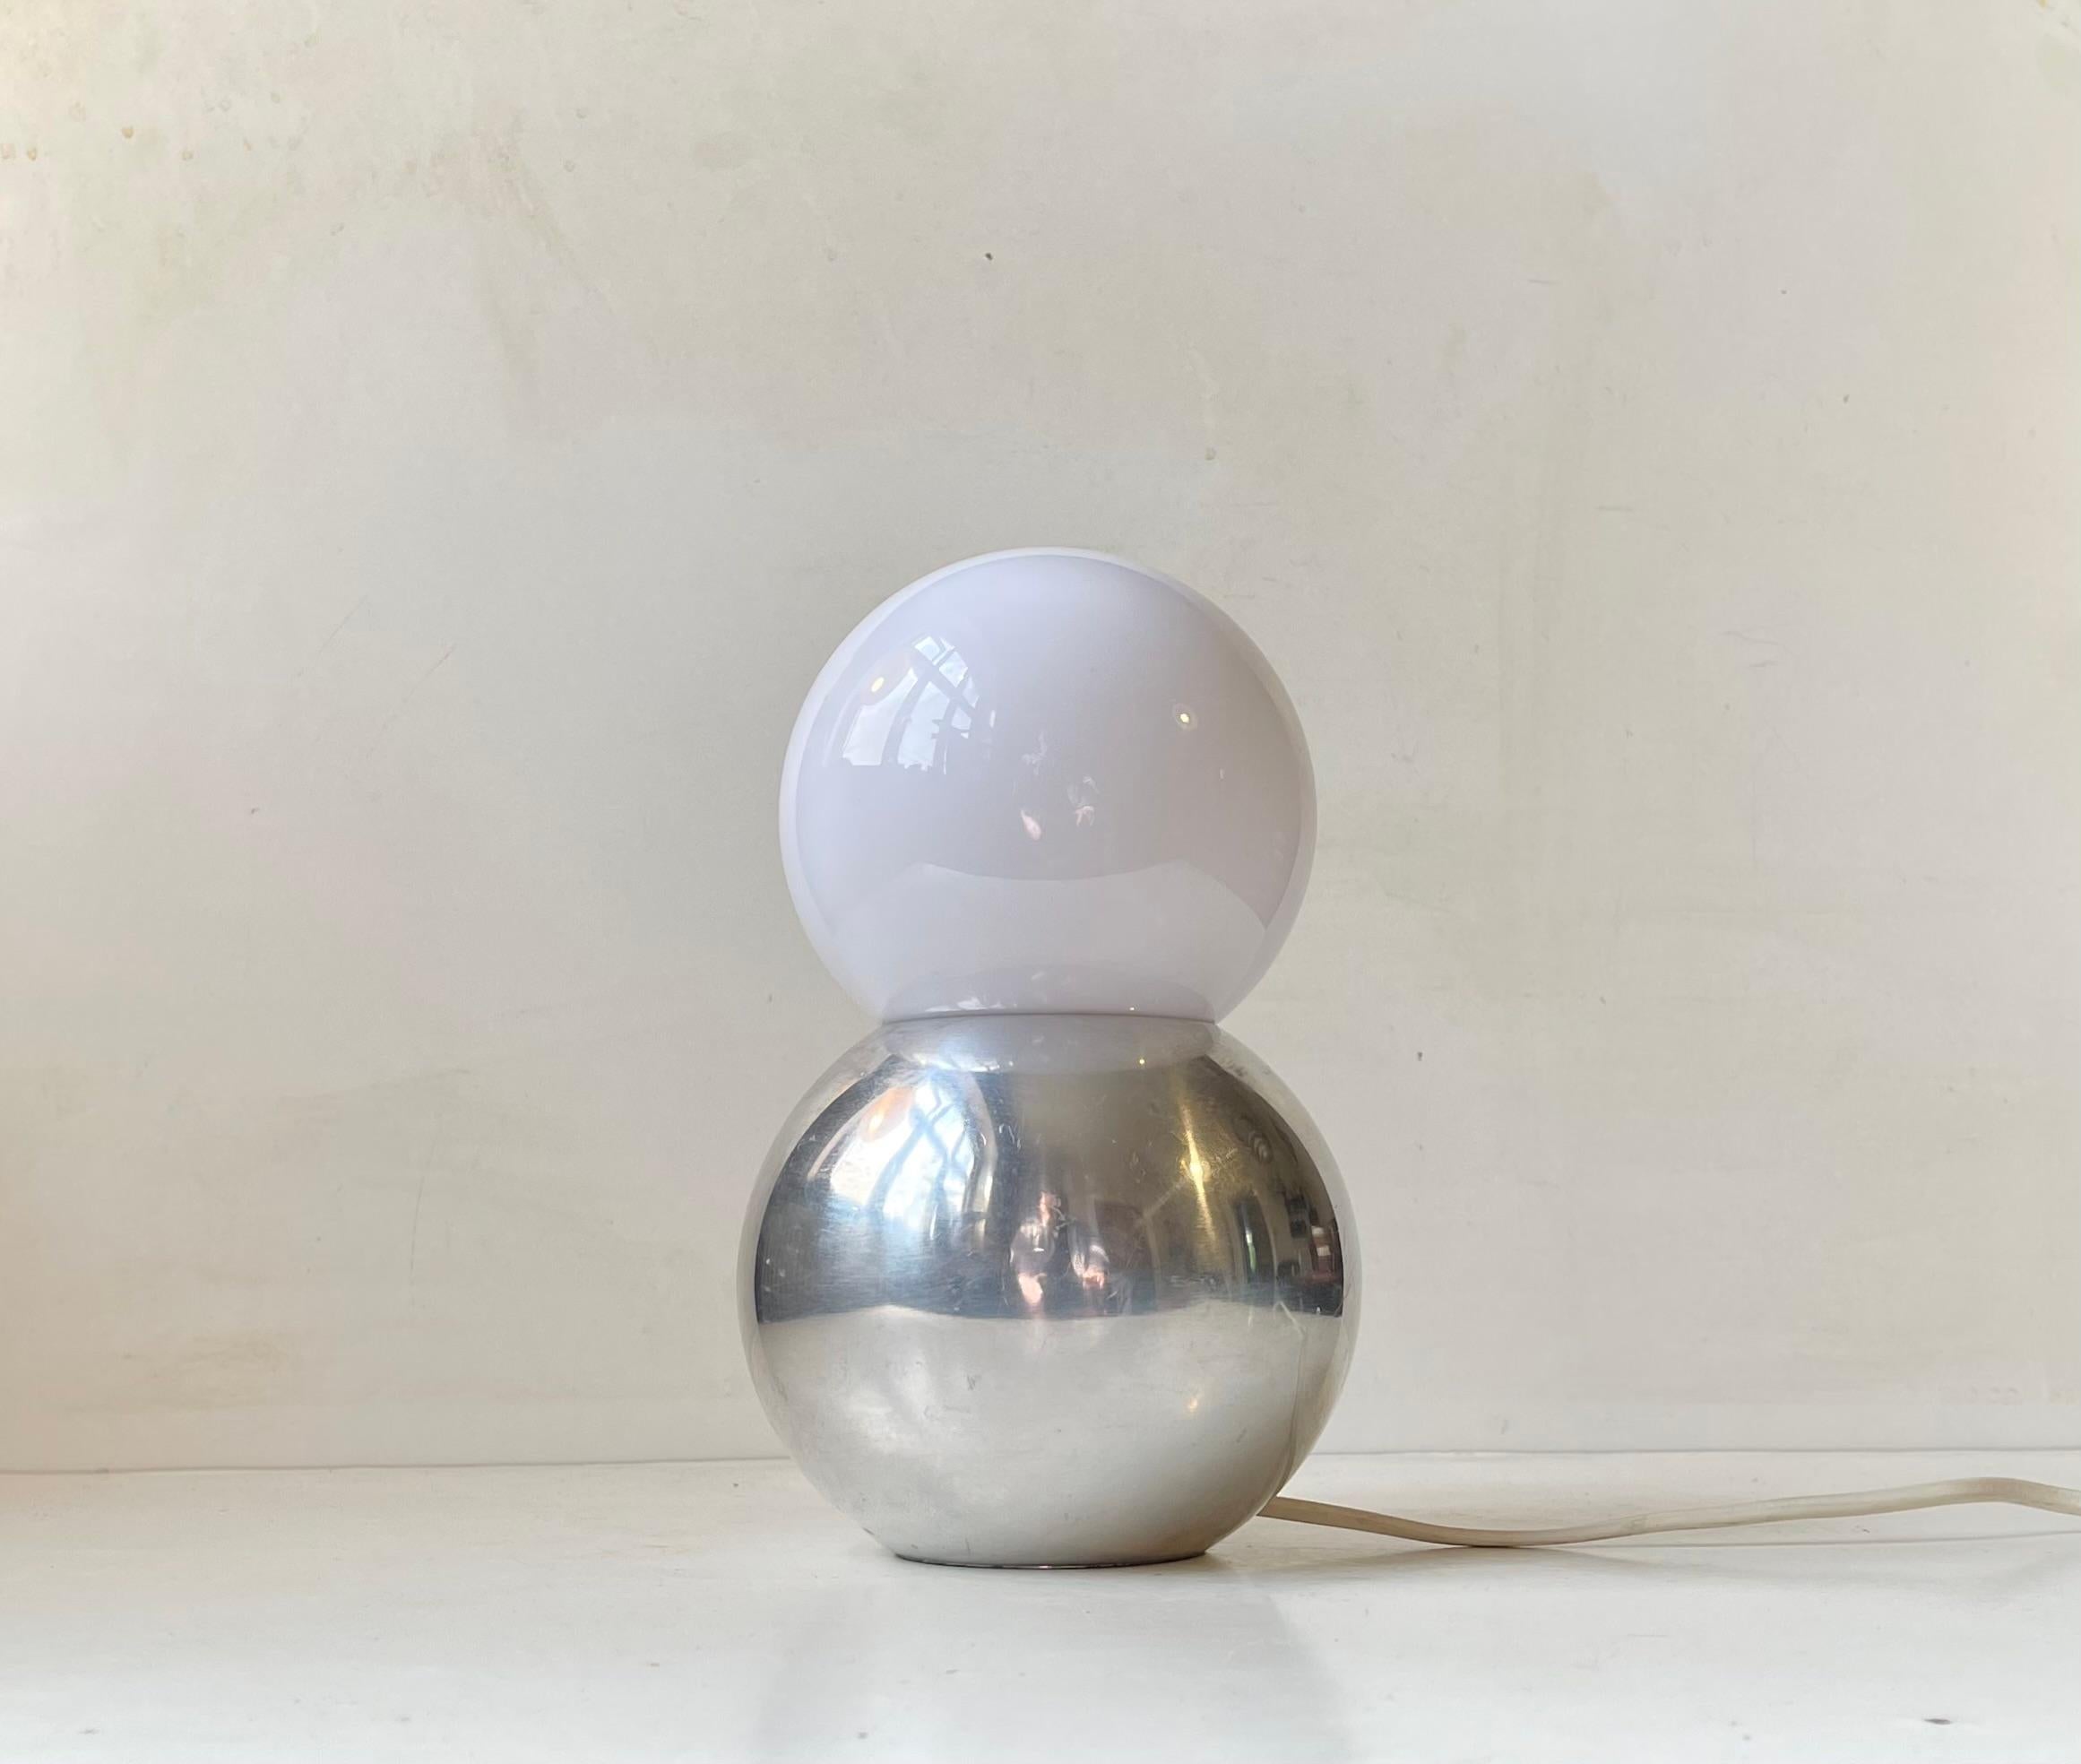 Unusual and Sculptural modern table light executed in polished Aluminum and featuring an acrylic shade. A sphere on a sphere. The perfect mix of Minimalism and Scandinavian organic modern in both shape and composition. Its by an unknown Scandinavian